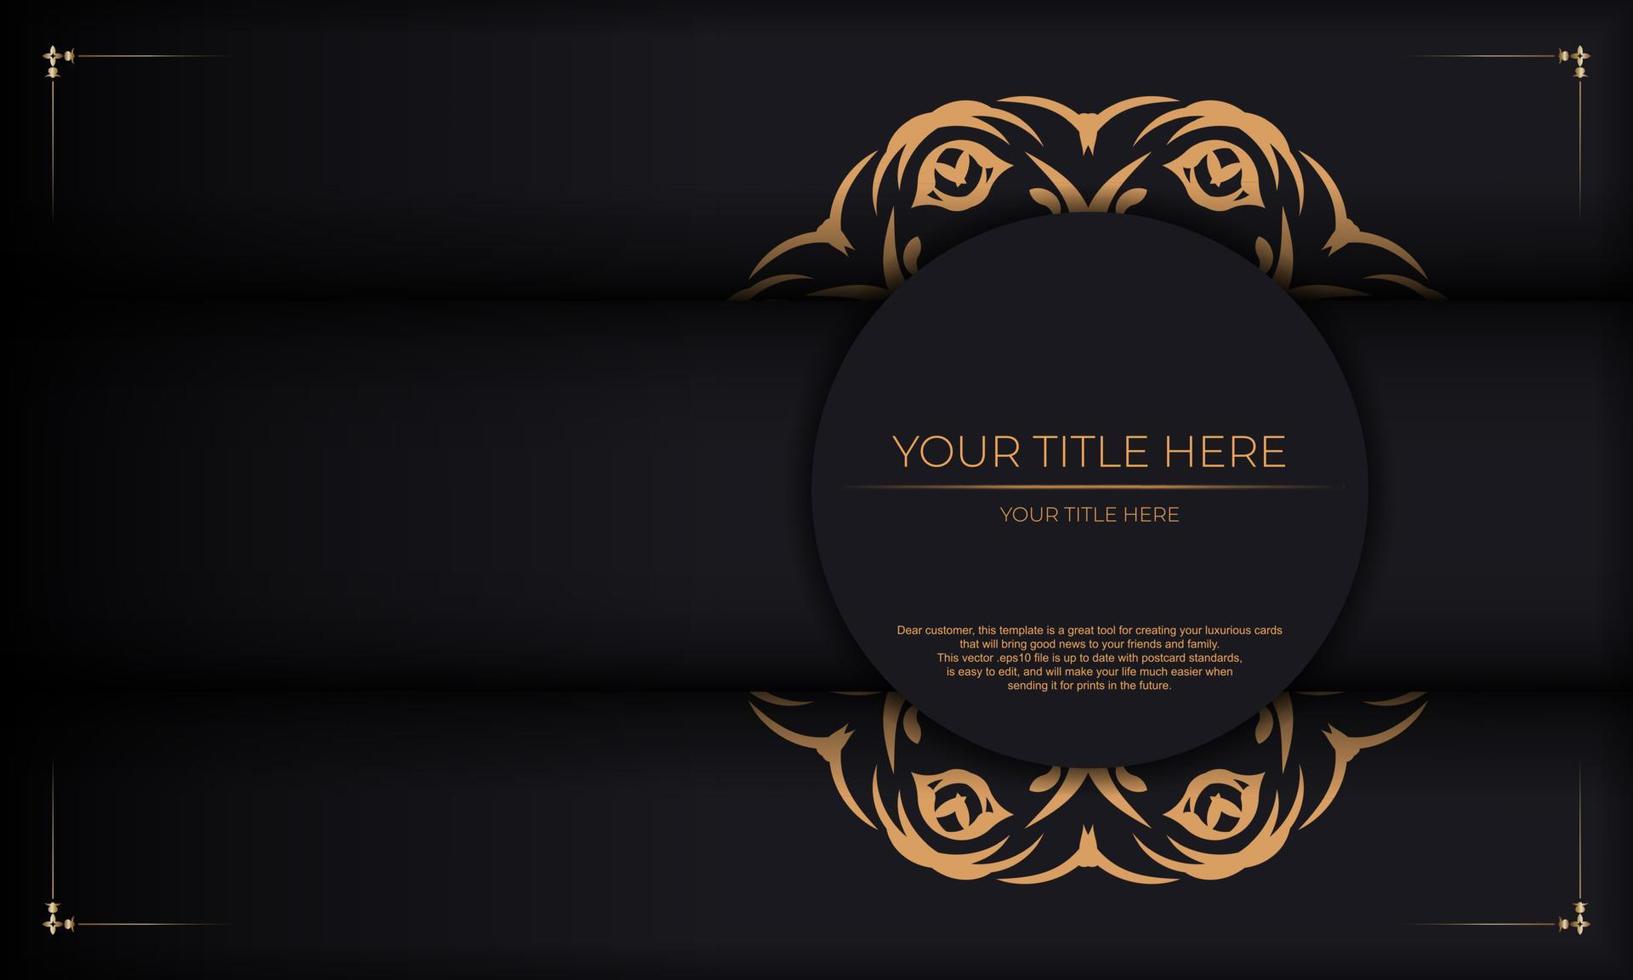 Black banner with abstract ornaments and place for your text. Invitation card design with vintage patterns. vector